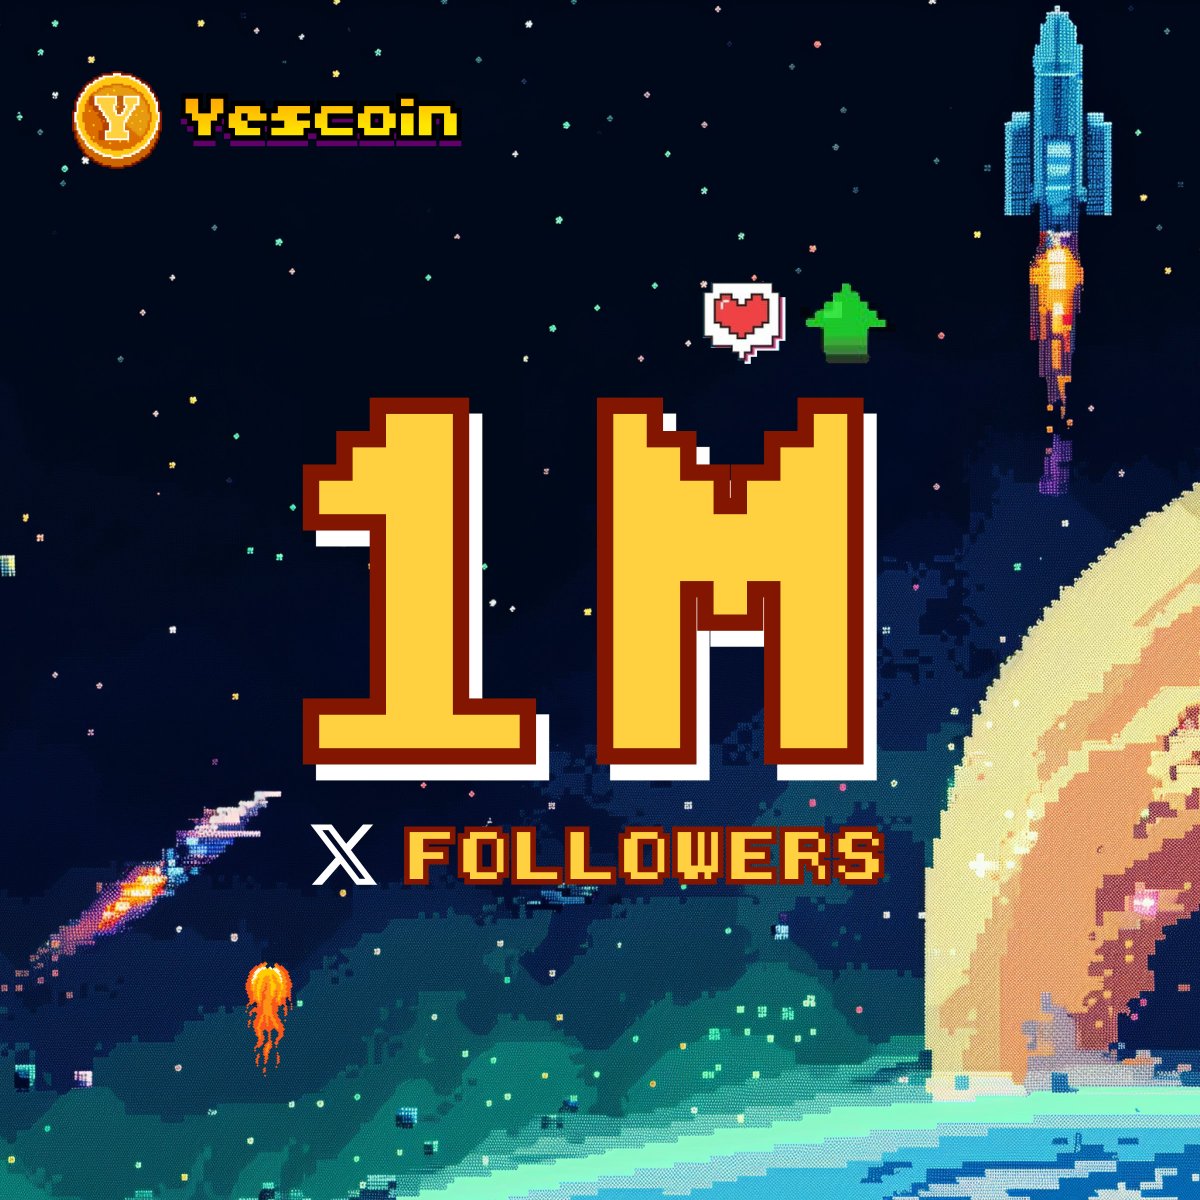 6 WEEKS, 1M FOLLOWERS 👀 The influence comes from Yescoiners all over the world Connect the world, fun & easy transition into Web3 is our vision. Incredible. It happened so fast.🚀 YES, Let's say YES! YES for billions. $YES for billions.💎 #yescoin #yescoiner